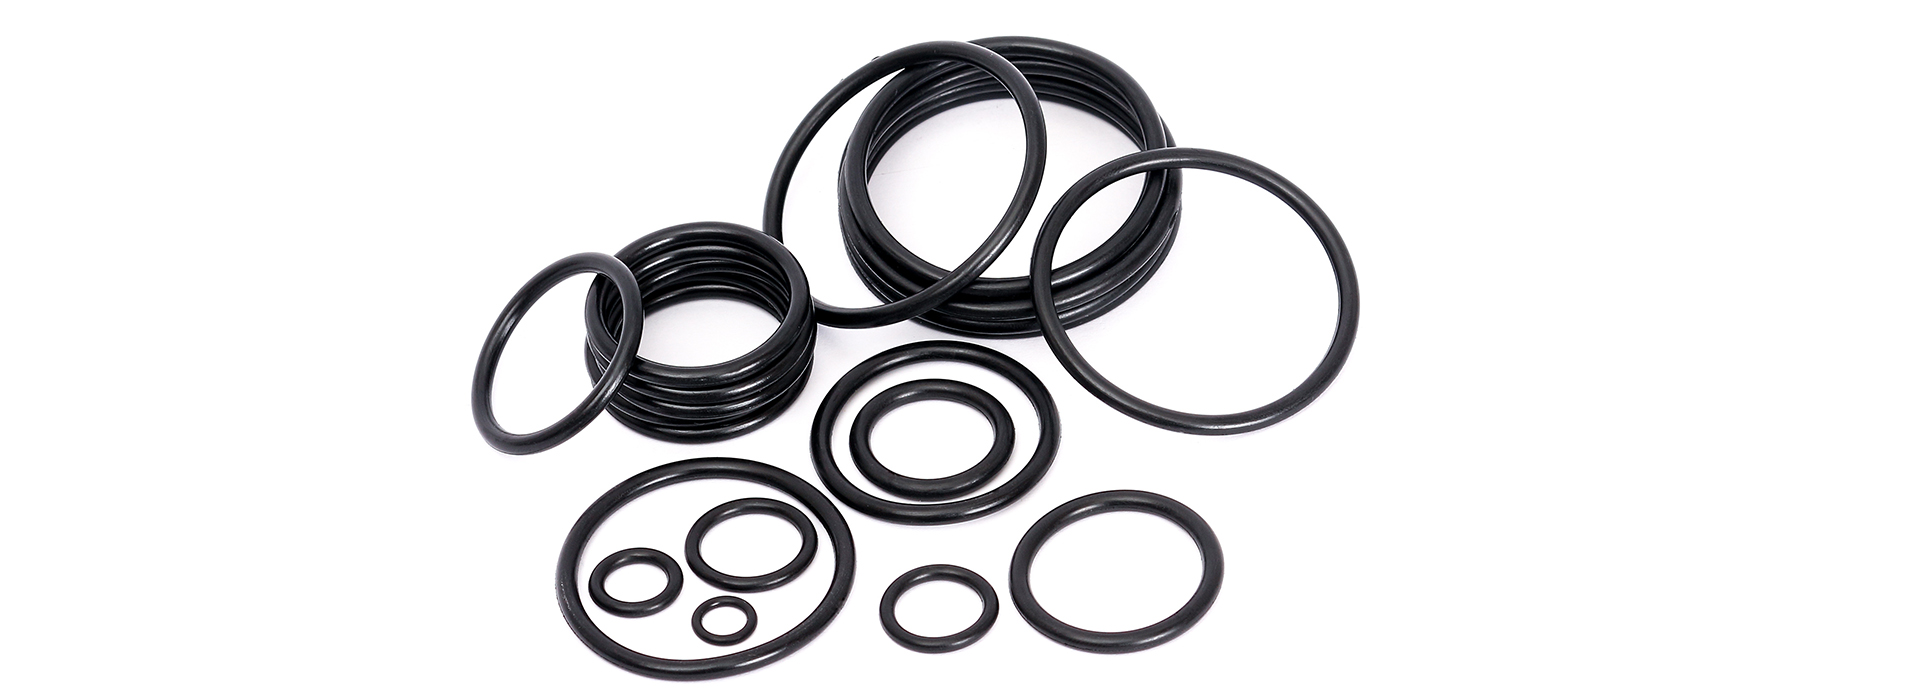 Different o-rings used for pipe repairing and sealing